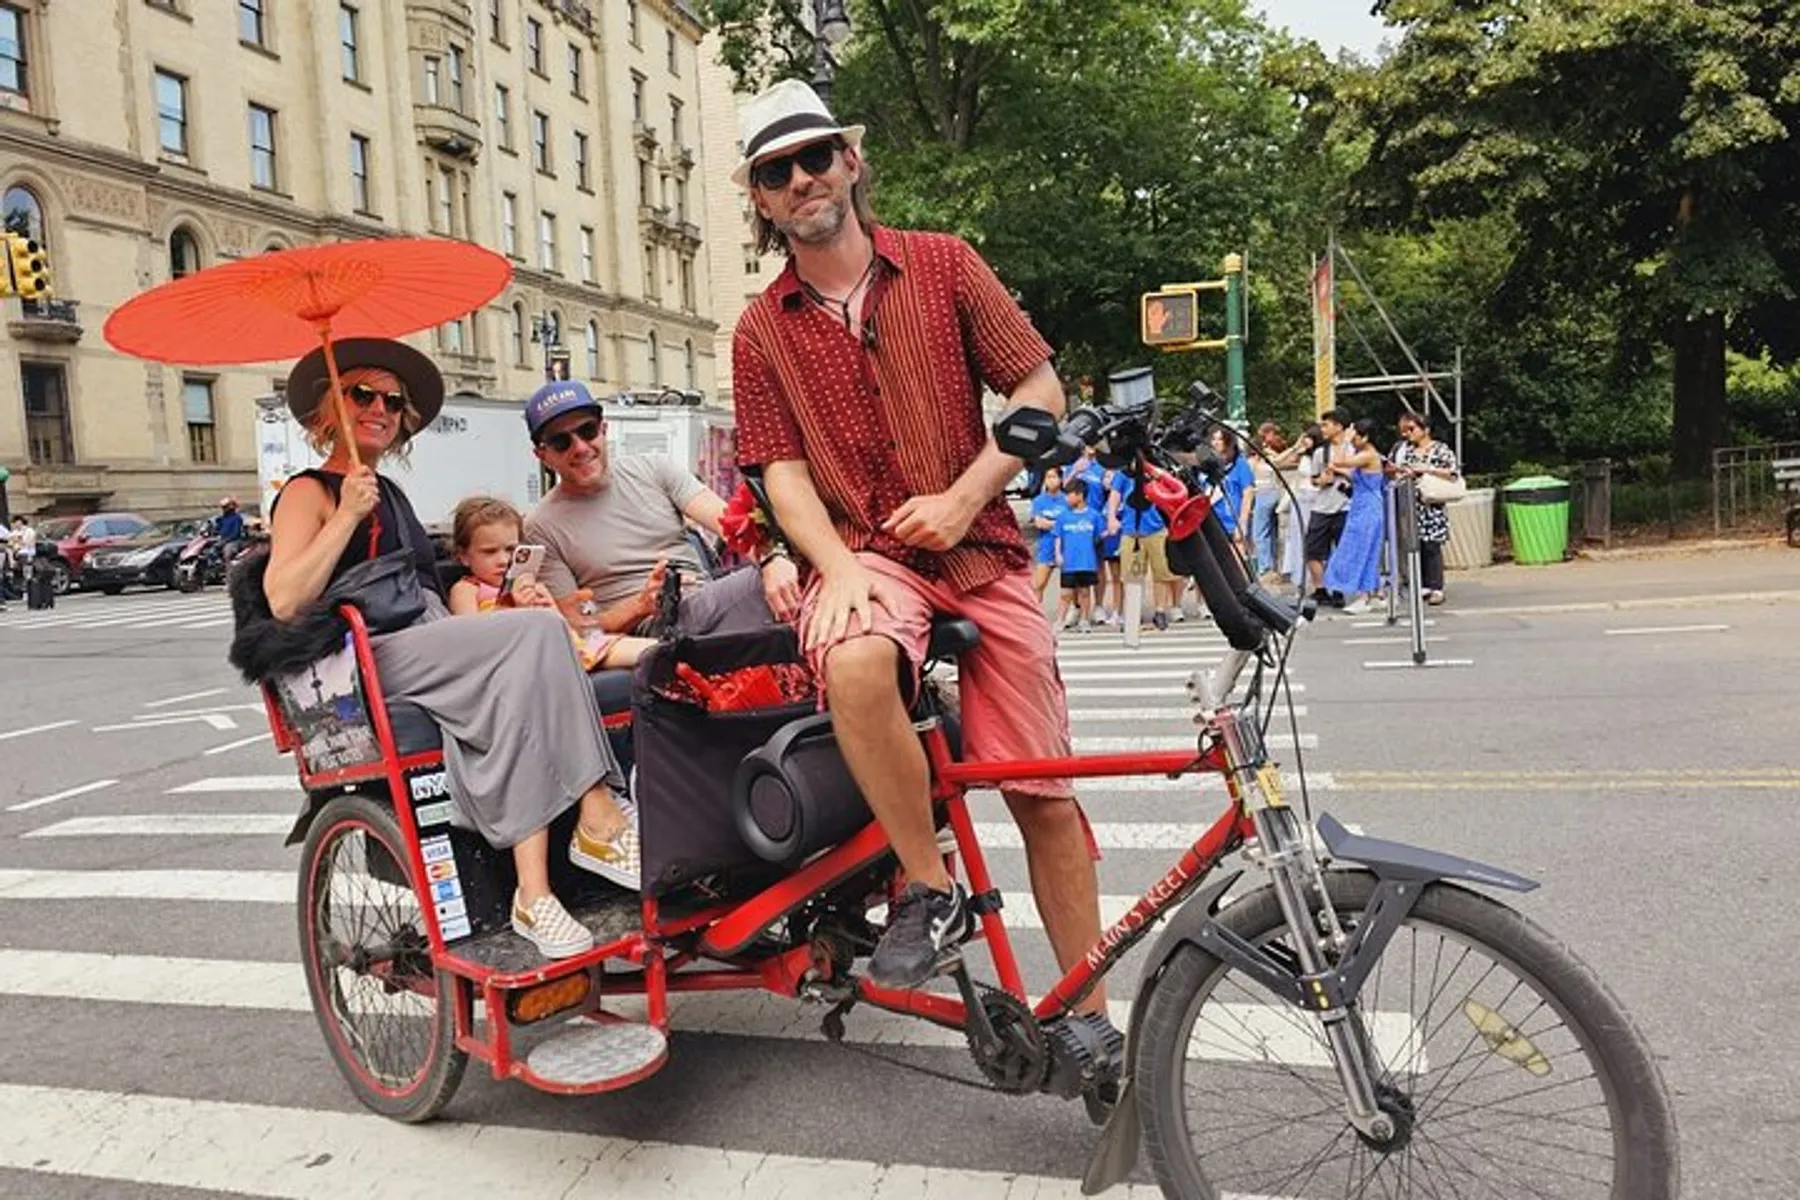 A family is enjoying a ride on an urban pedicab with the driver at the front and a woman holding a red parasol seated behind him.